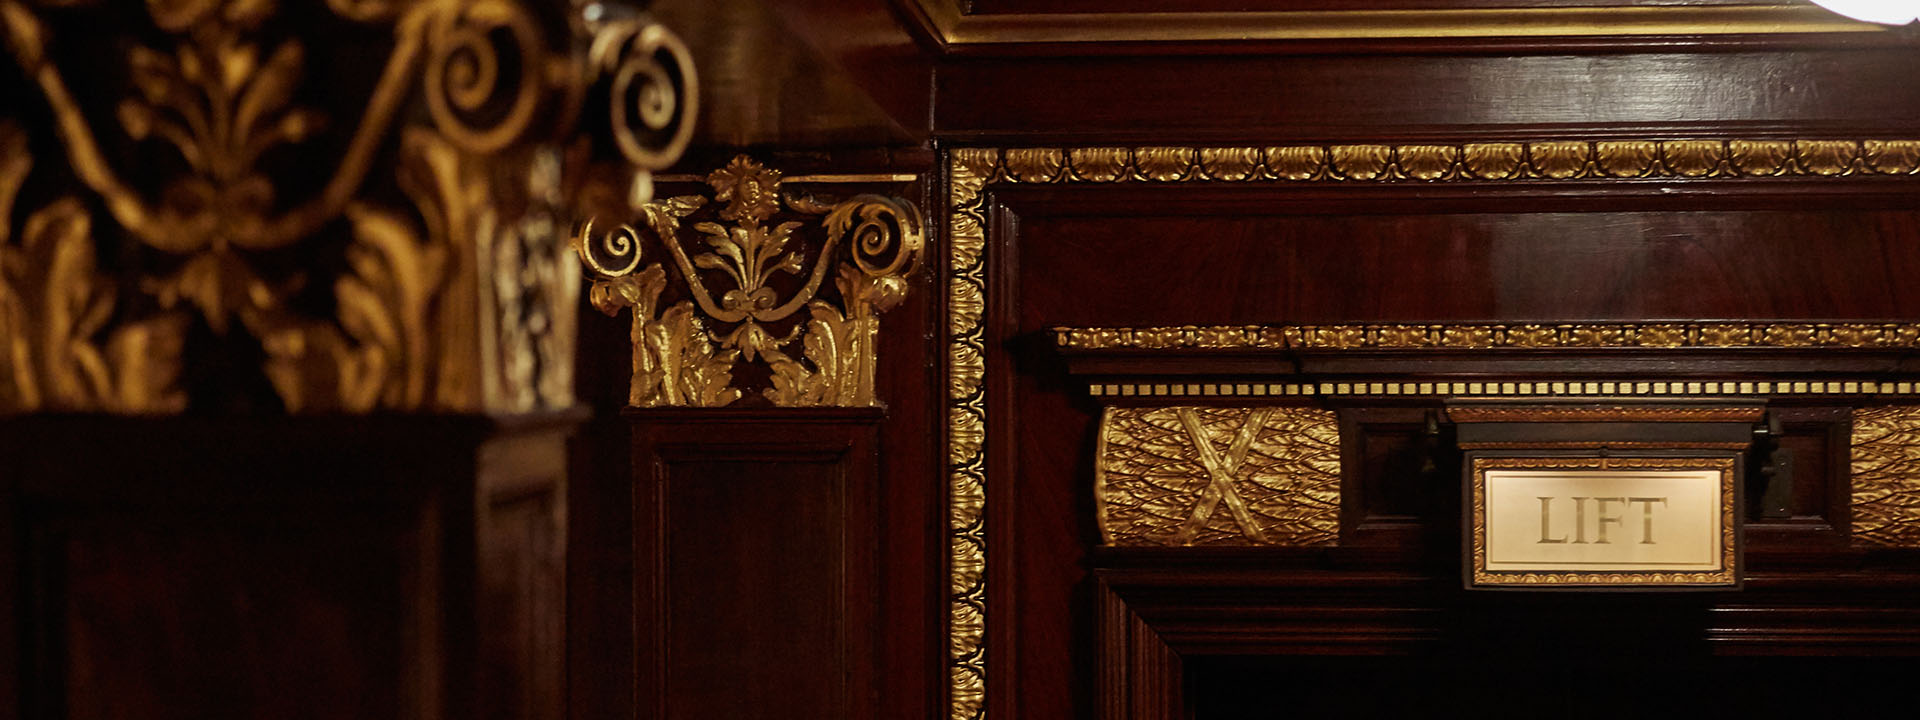 A closeup shot showing the golden details on the wood work.